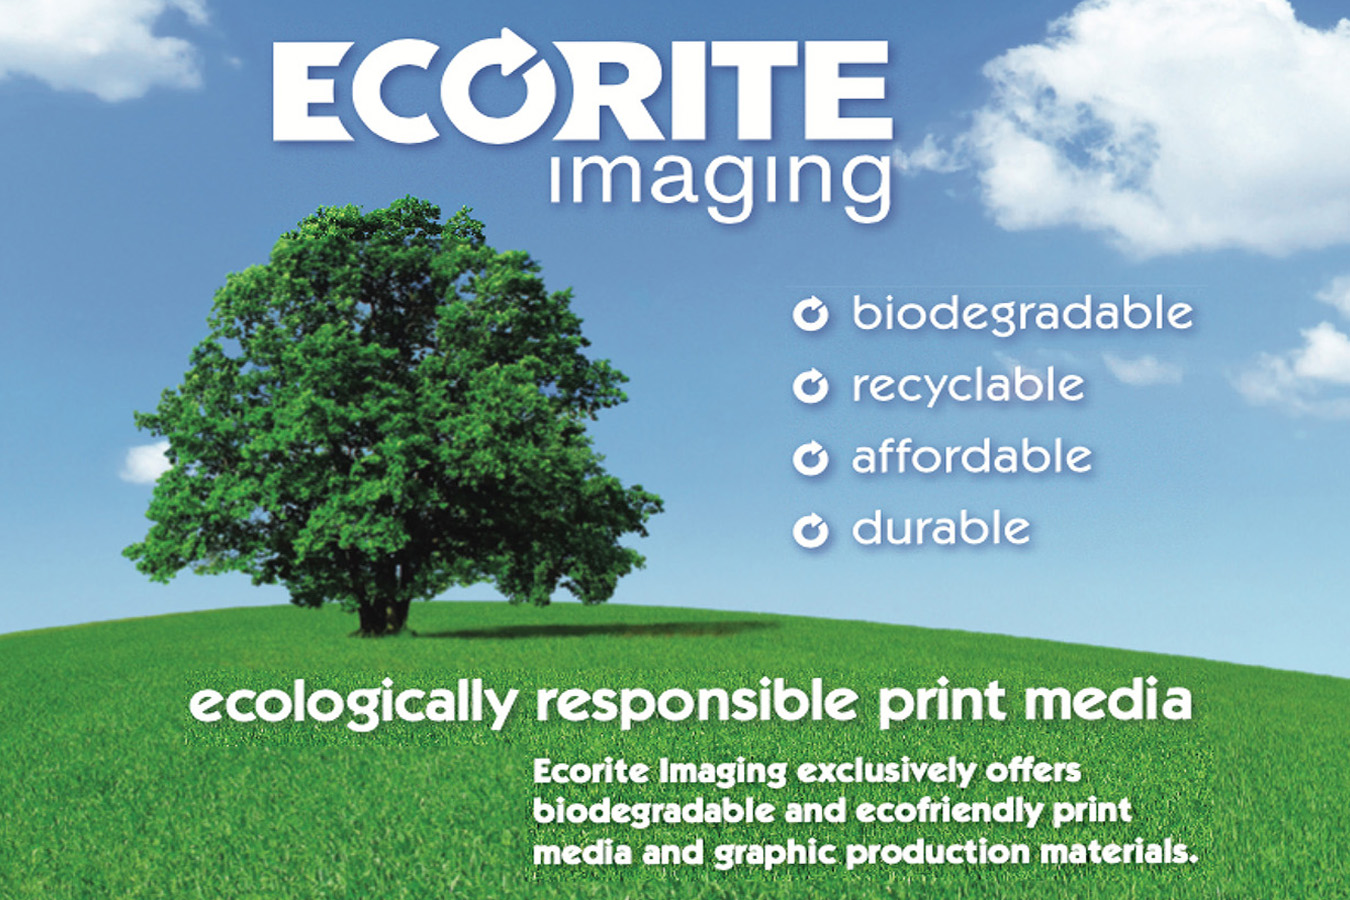 Ecorite 1 : Biodegradable and Recycled Print Materials = Eco Responsible Graphic Solutions